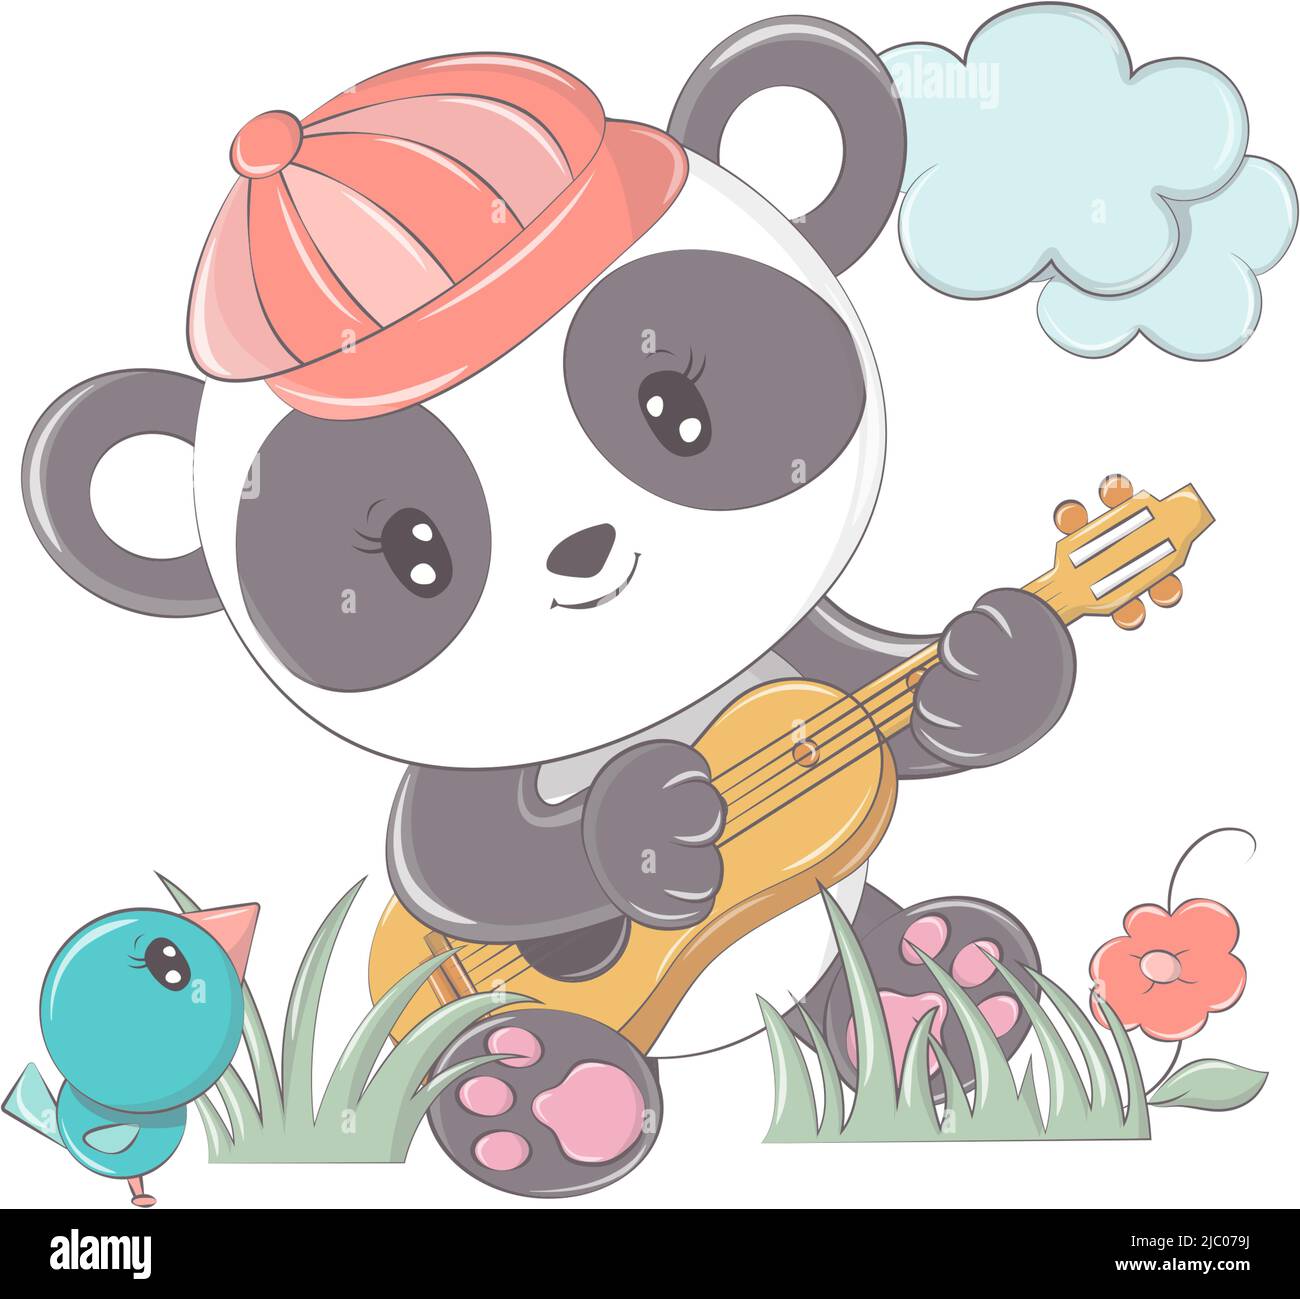 Vector images of a panda in kawaii style. The cartoon character is made for a kids group of goods. The funny animal smiles cutely. Animal isolated on Stock Vector